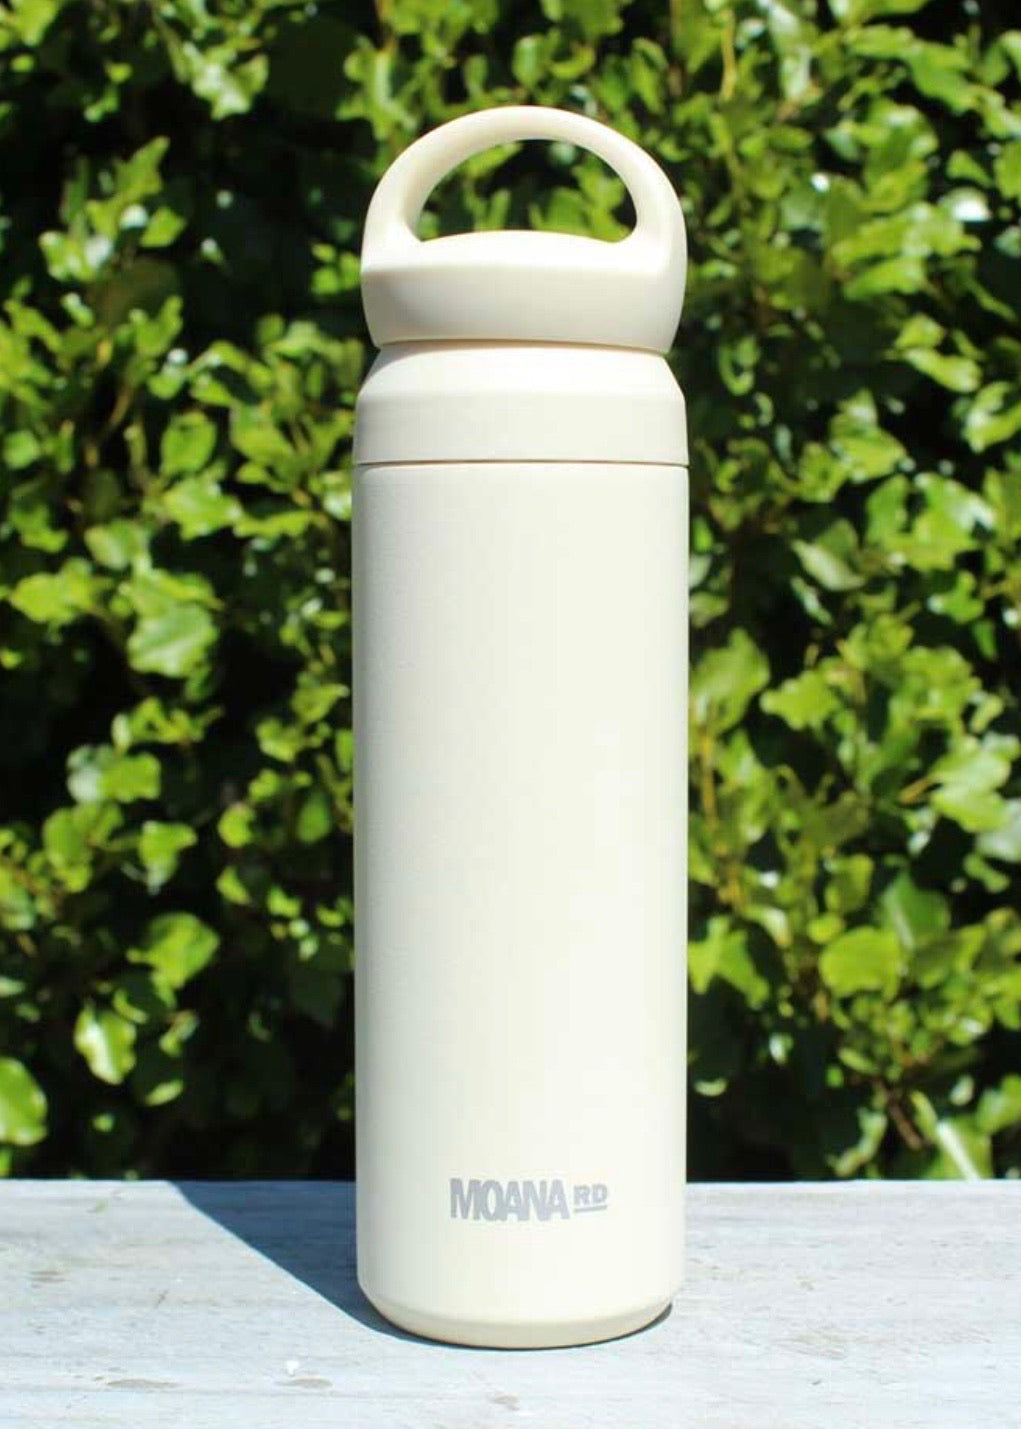 Moana Road Drink Bottle - The Canteen